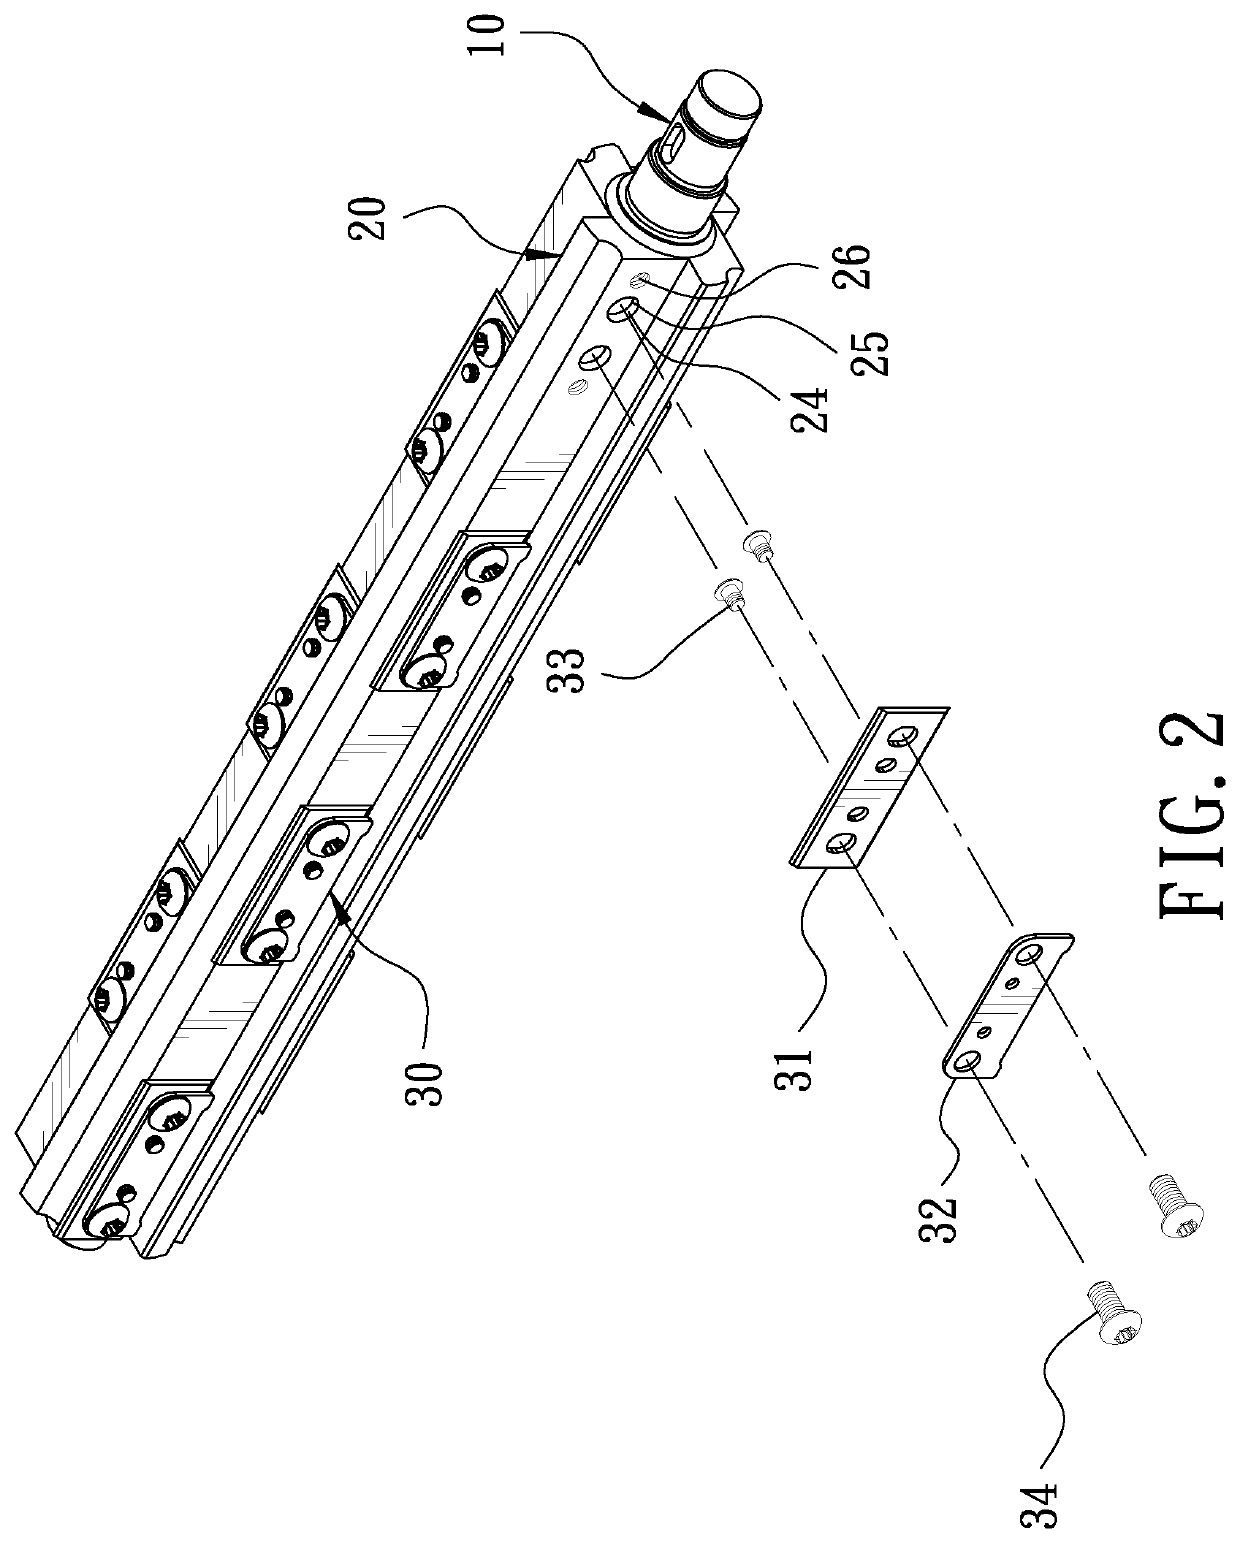 Adjustable multi-section blade structure for automatic planer